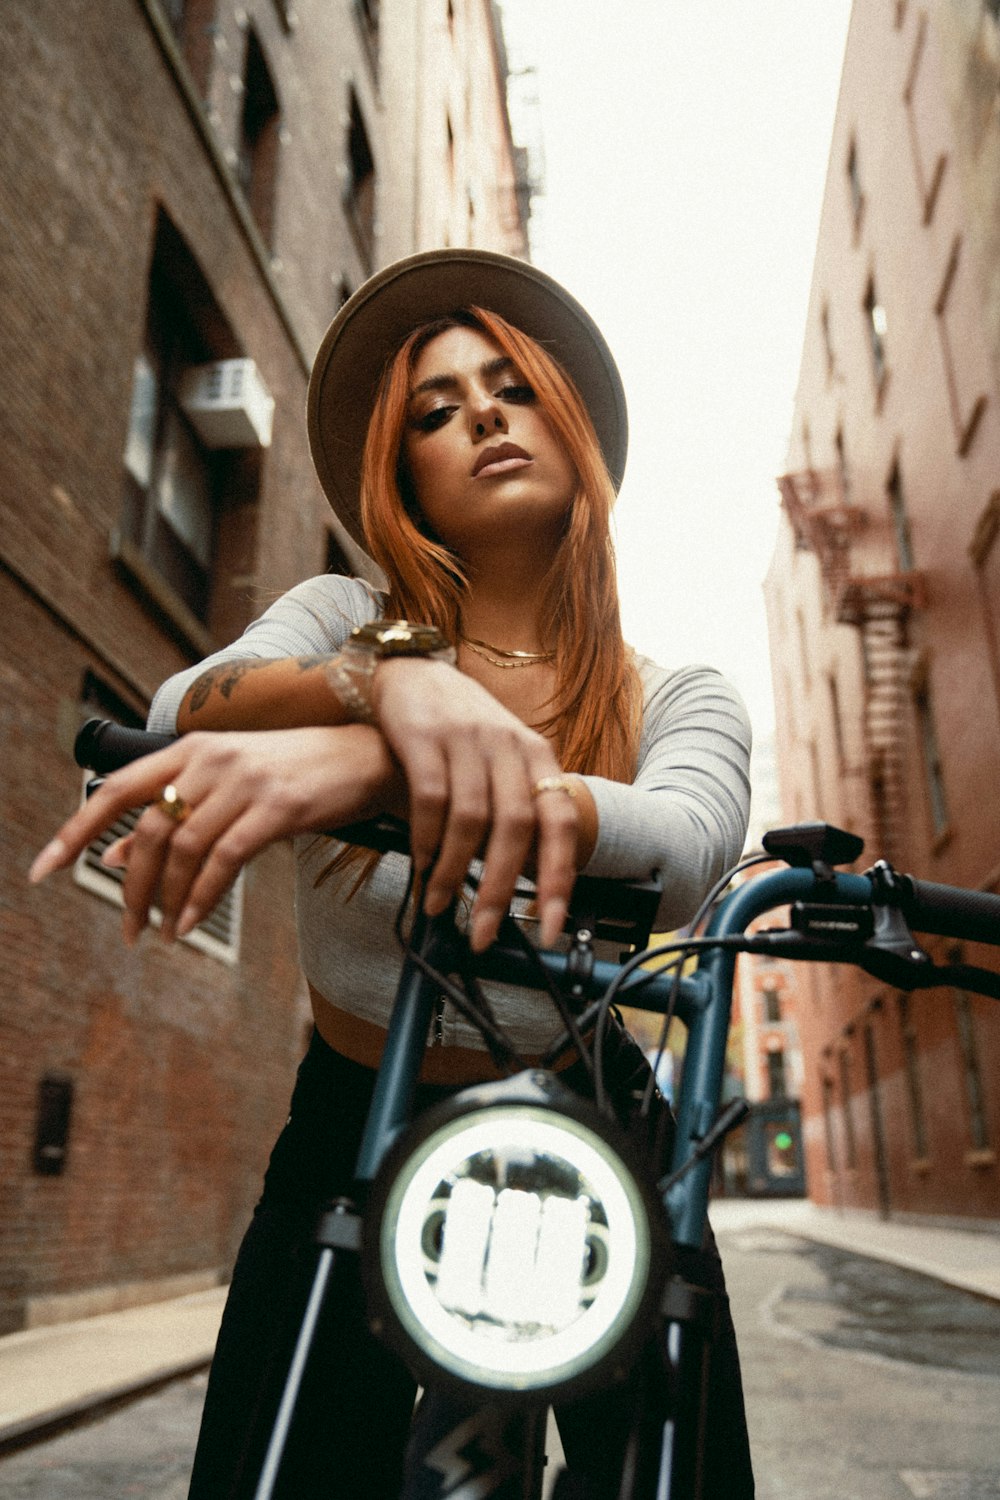 a woman with red hair is standing next to a bicycle